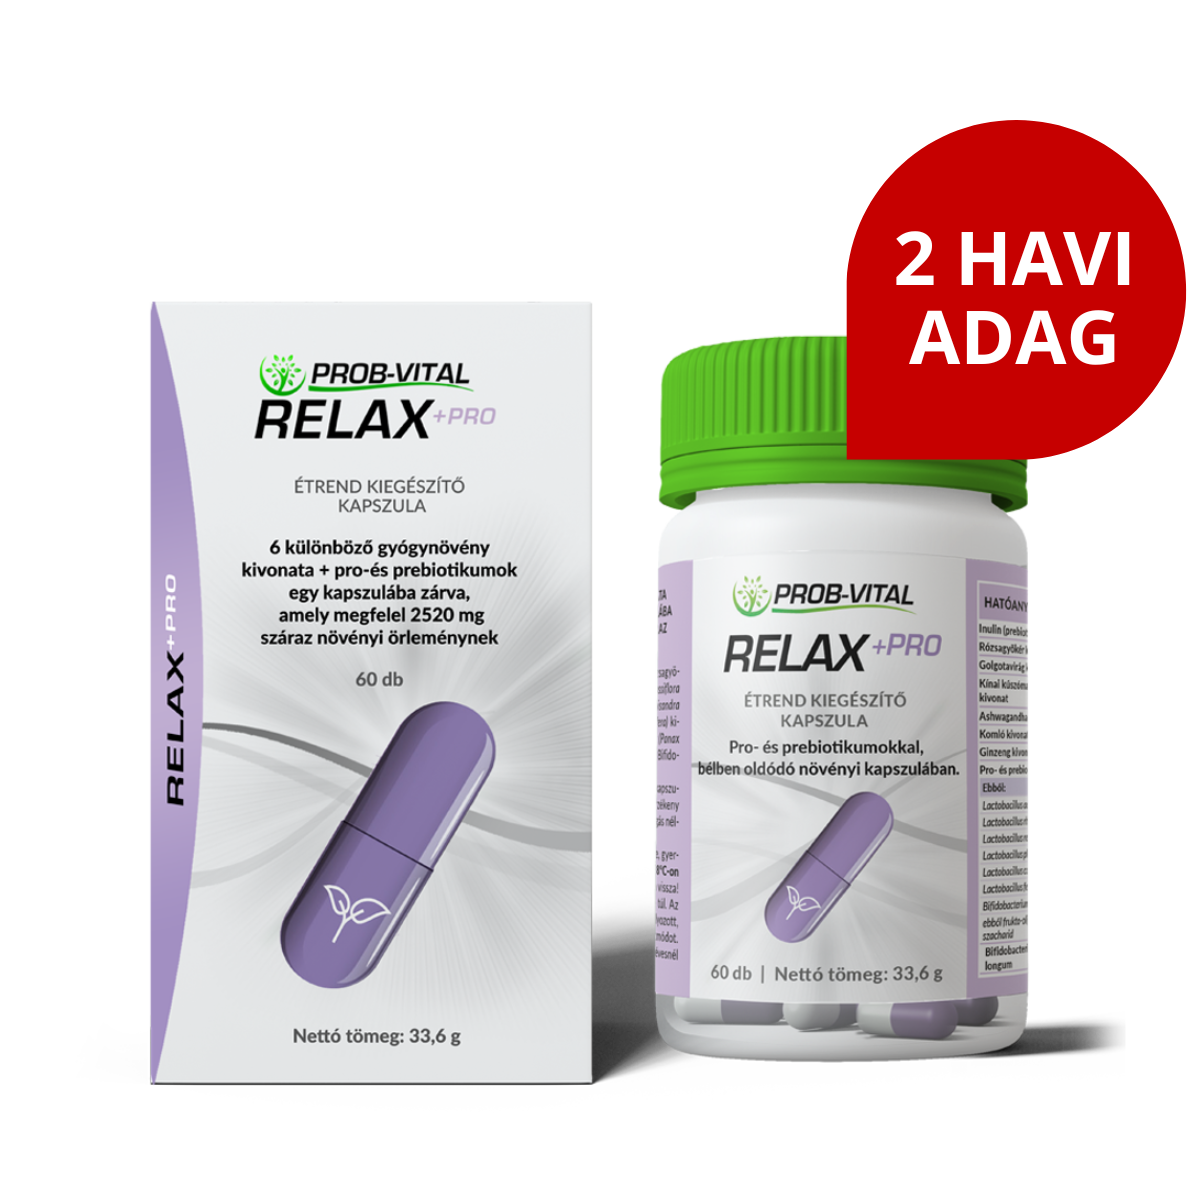 Relax+PRO (D112-2308-112)